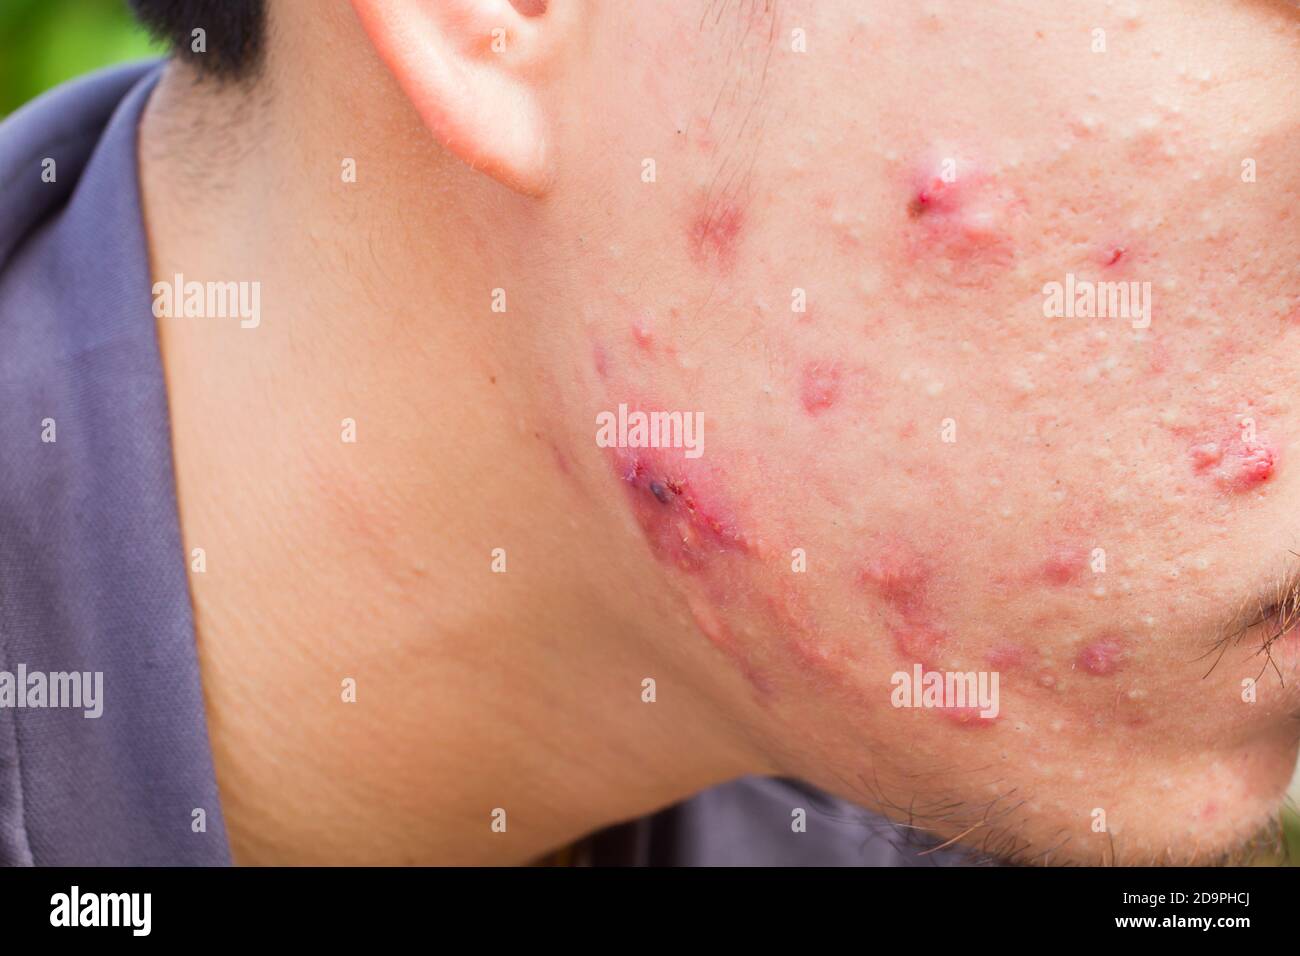 closeup horizontal photo of male cheek with big pimple or acne abcess. Stock Photo